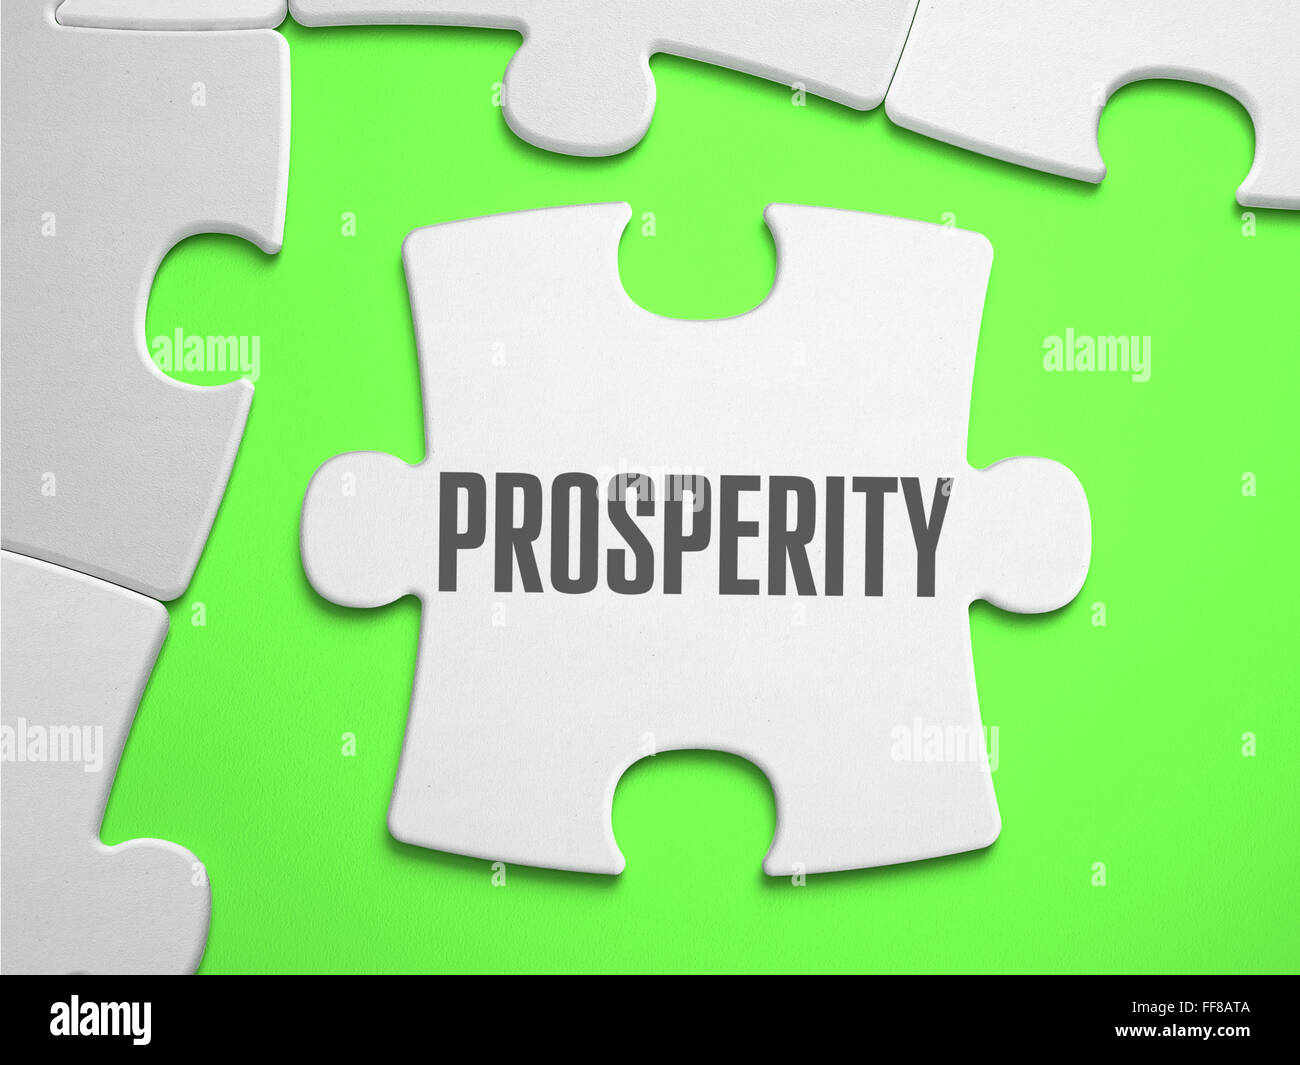 Prosperity - Jigsaw Puzzle with Missing Pieces. Stock Photo